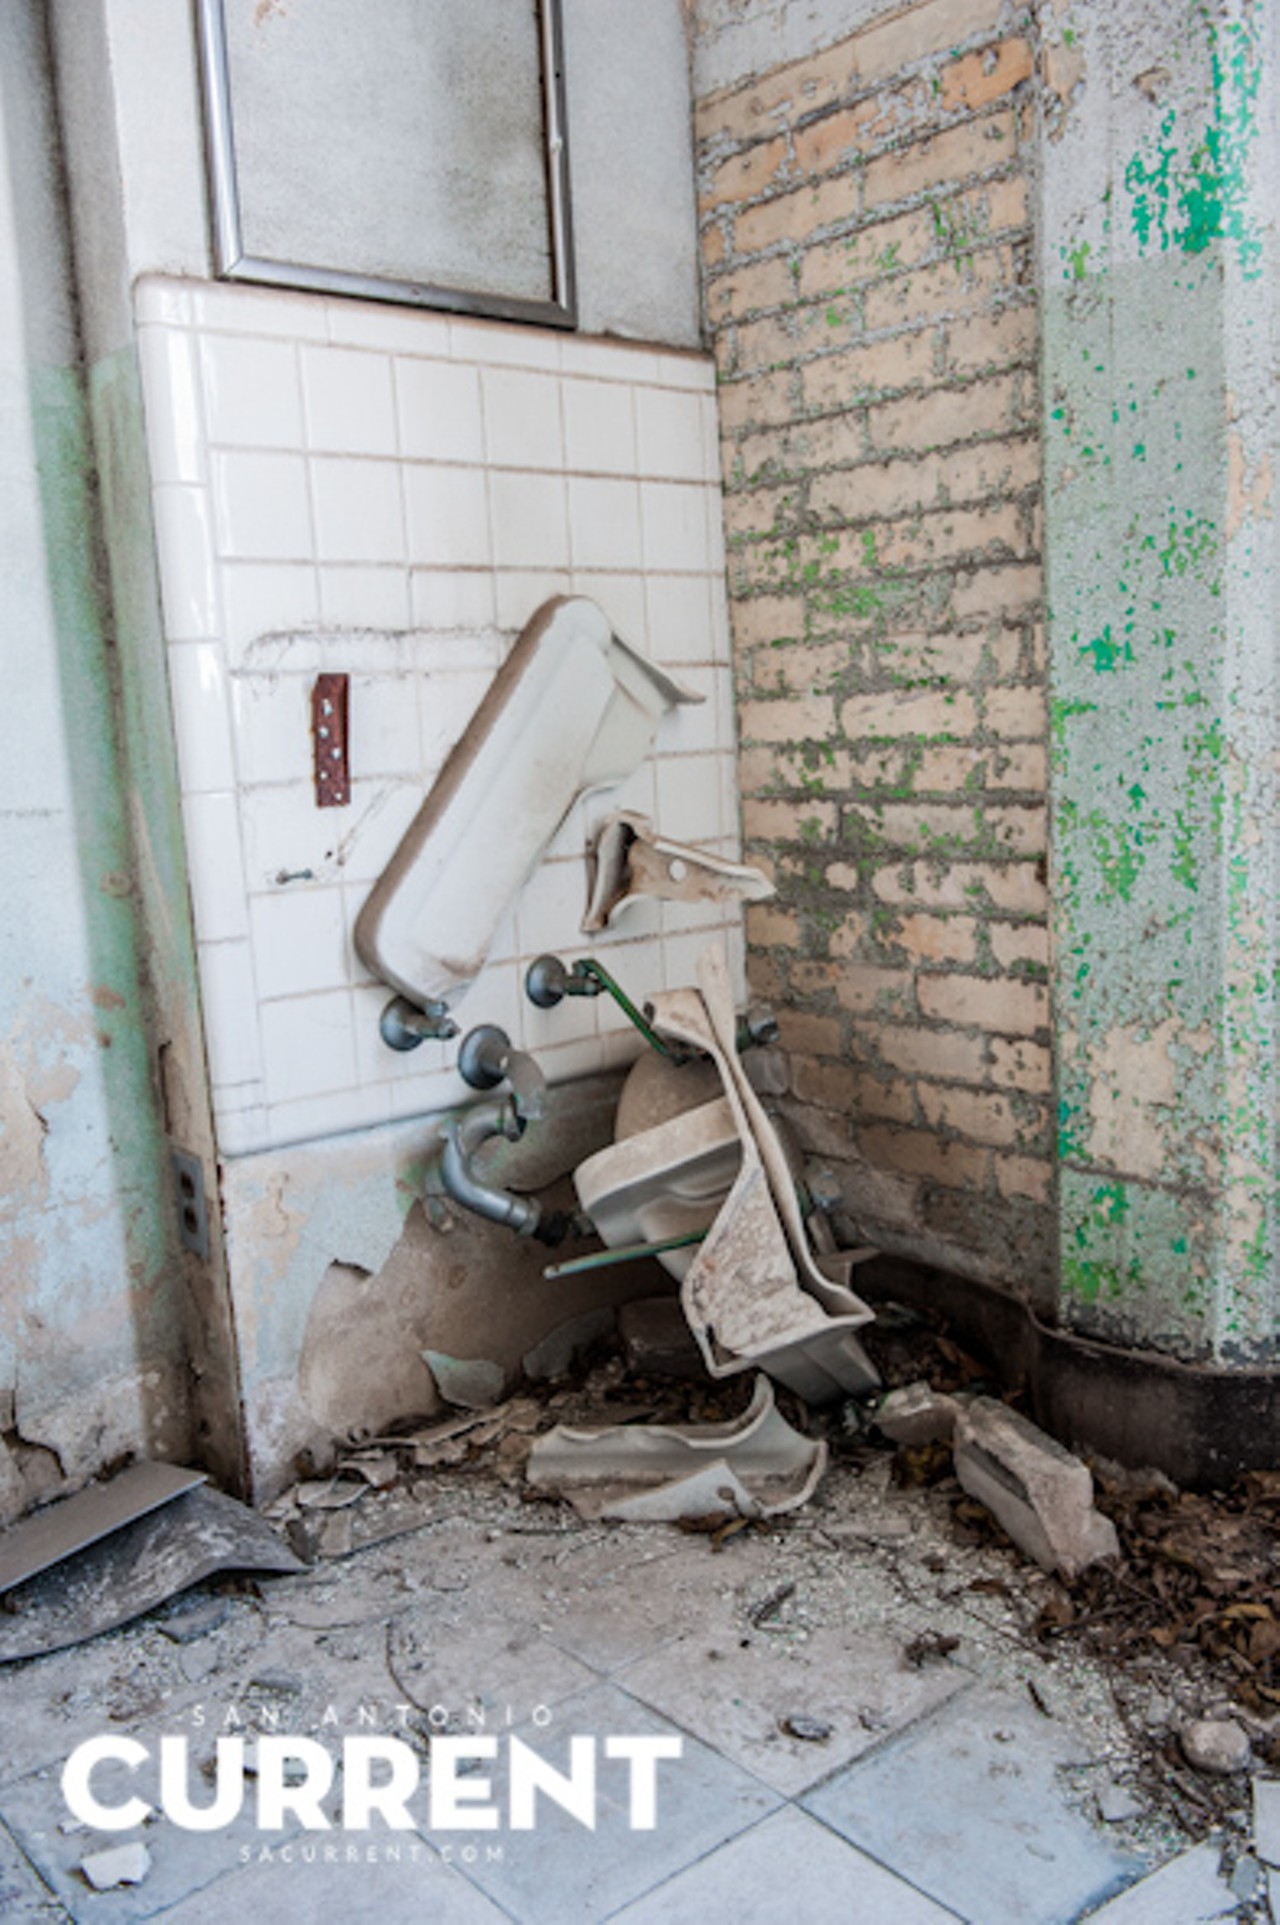 Photos from the Abandoned SAT State Asylum